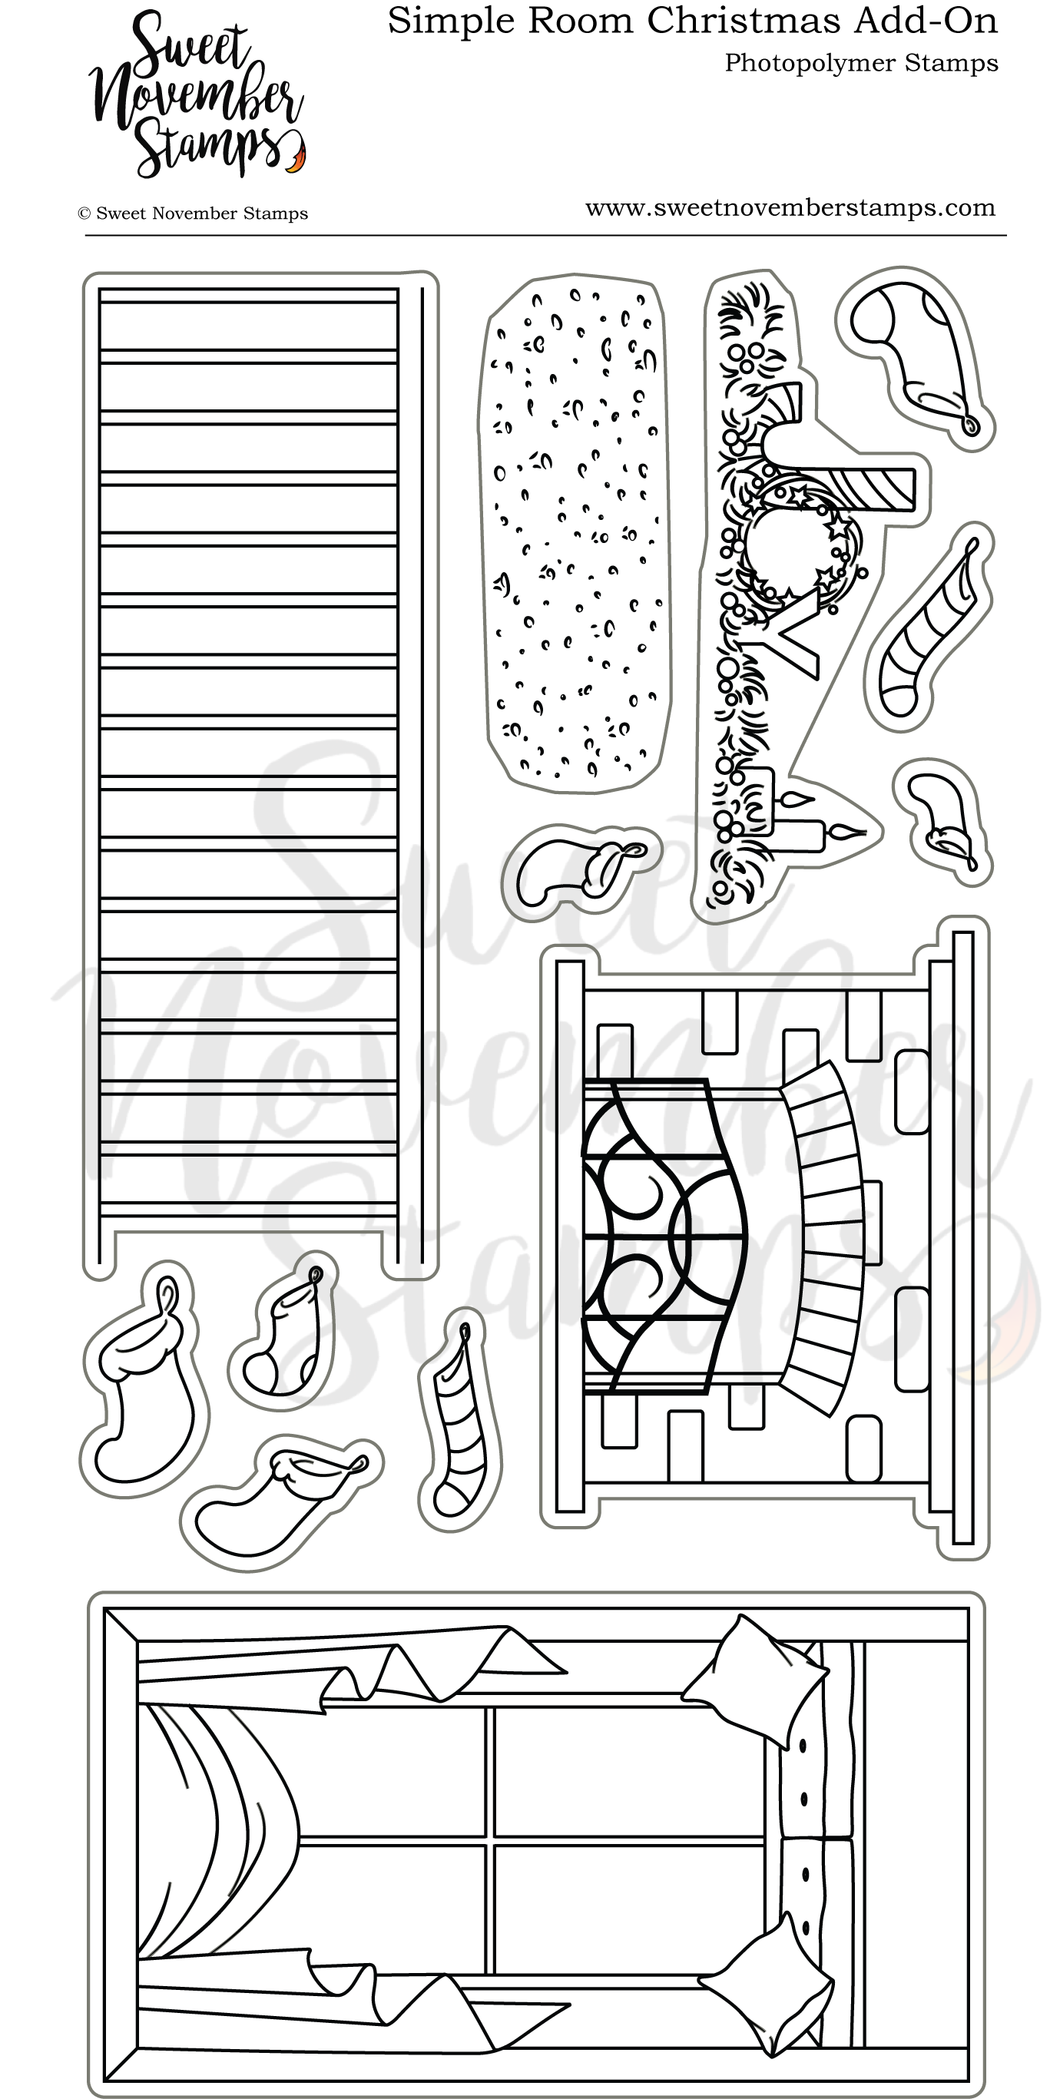 Clear Stamp Set - Simple Room Christmas Add-On